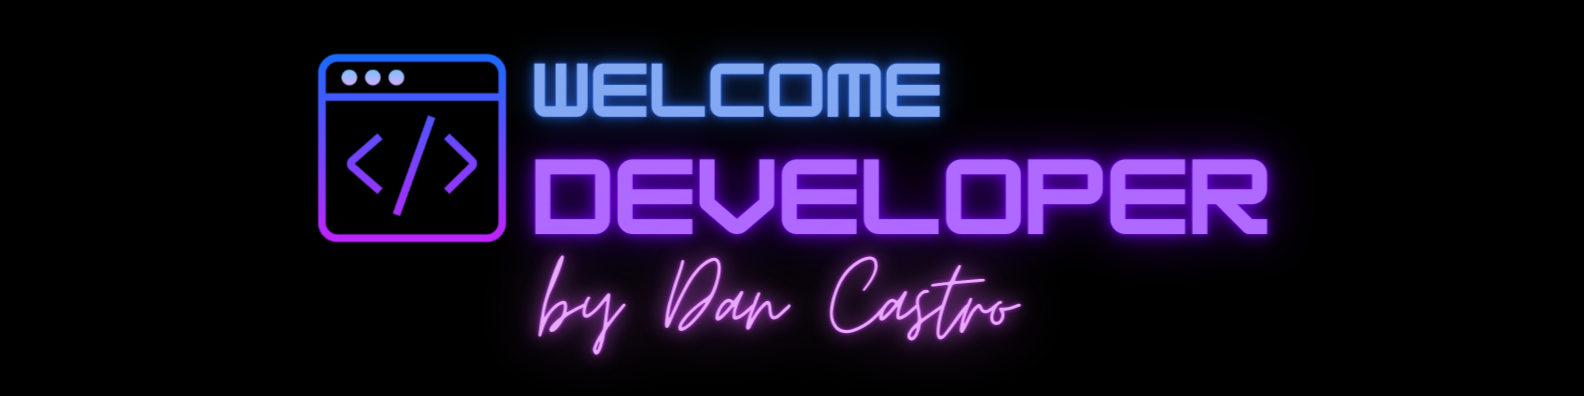 Welcome, Developer. A place for developers to have a great time while learning about web development.